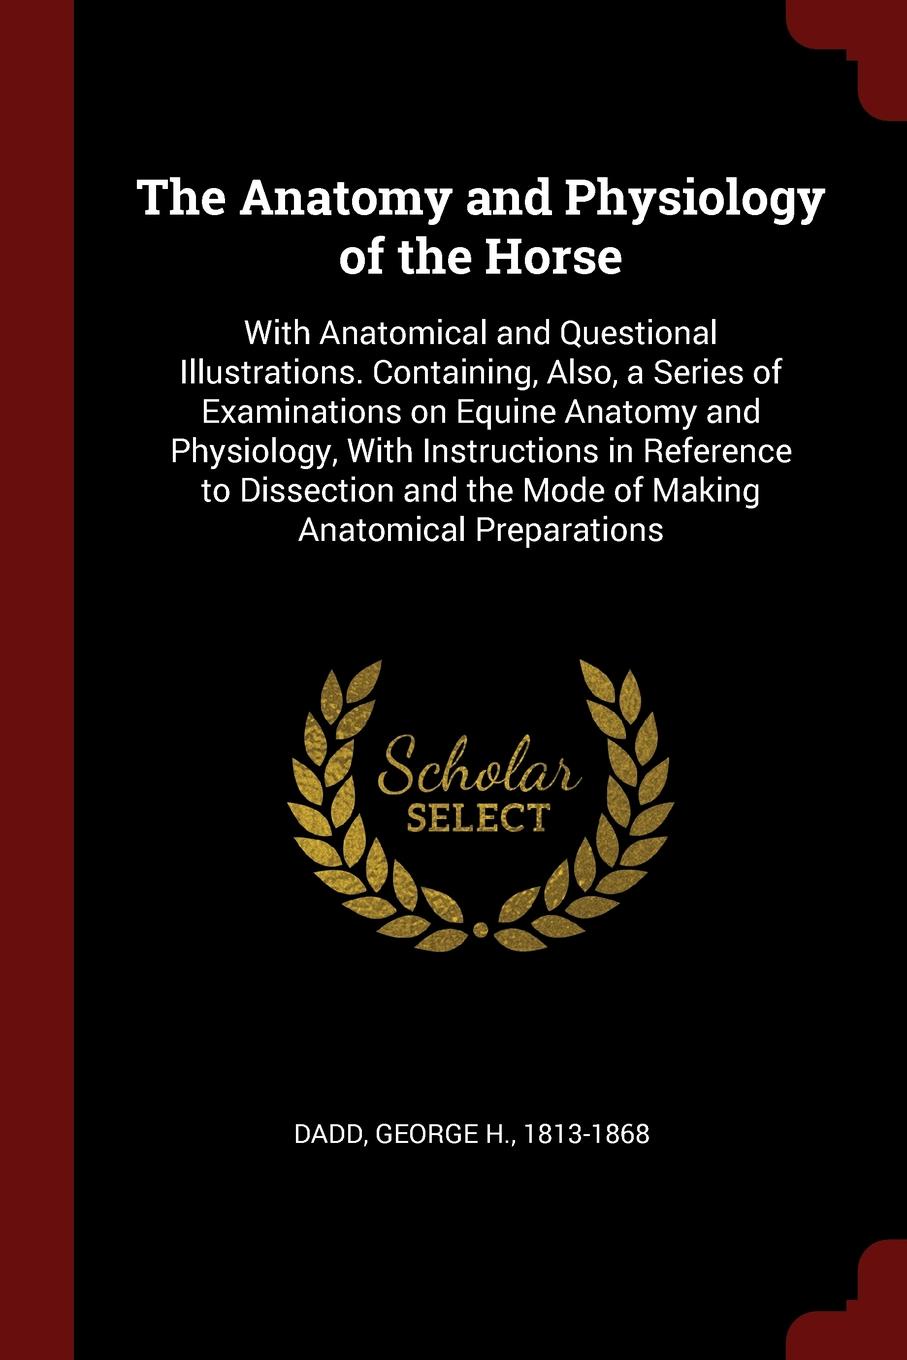 The Anatomy and Physiology of the Horse. With Anatomical and Questional Illustrations. Containing, Also, a Series of Examinations on Equine Anatomy and Physiology, With Instructions in Reference to Dissection and the Mode of Making Anatomical Prep...